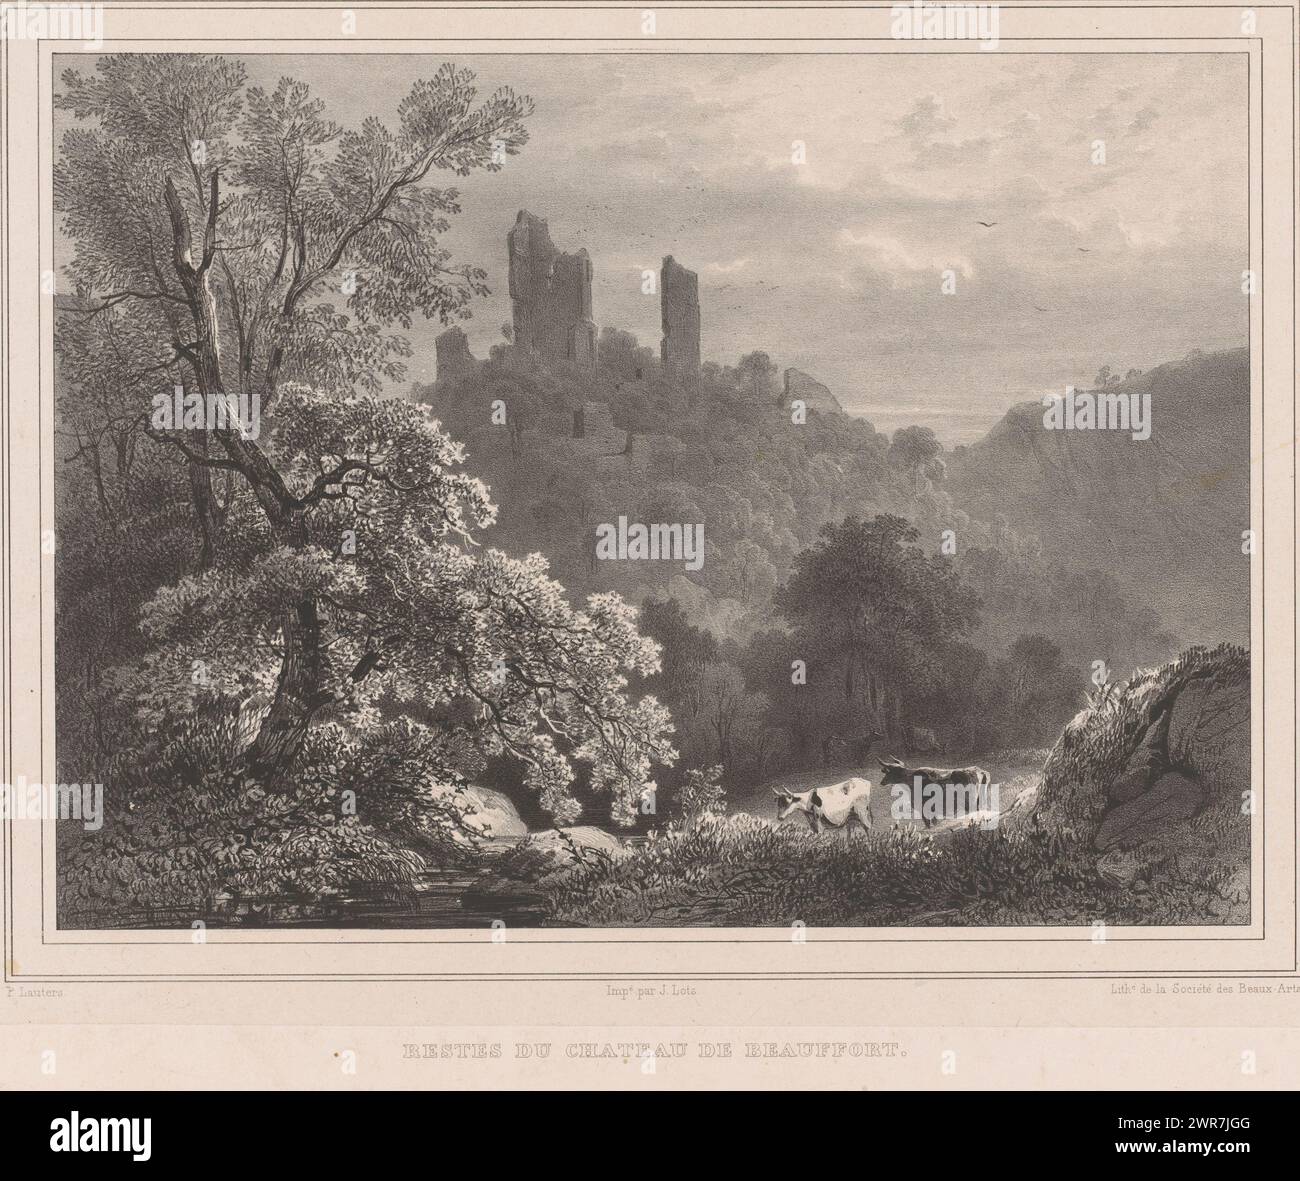 Landscape with the ruins of Beauffort, Restes du Chateau de Beauffort (title on object), Ruin, probably somewhere in the province of Namur. Numbered at the top: 24., print maker: Paulus Lauters, printer: J. Lots, publisher: Société des Beaux-Arts, Brussels, 1839 - 1841, paper, height 360 mm × width 548 mm, print Stock Photo